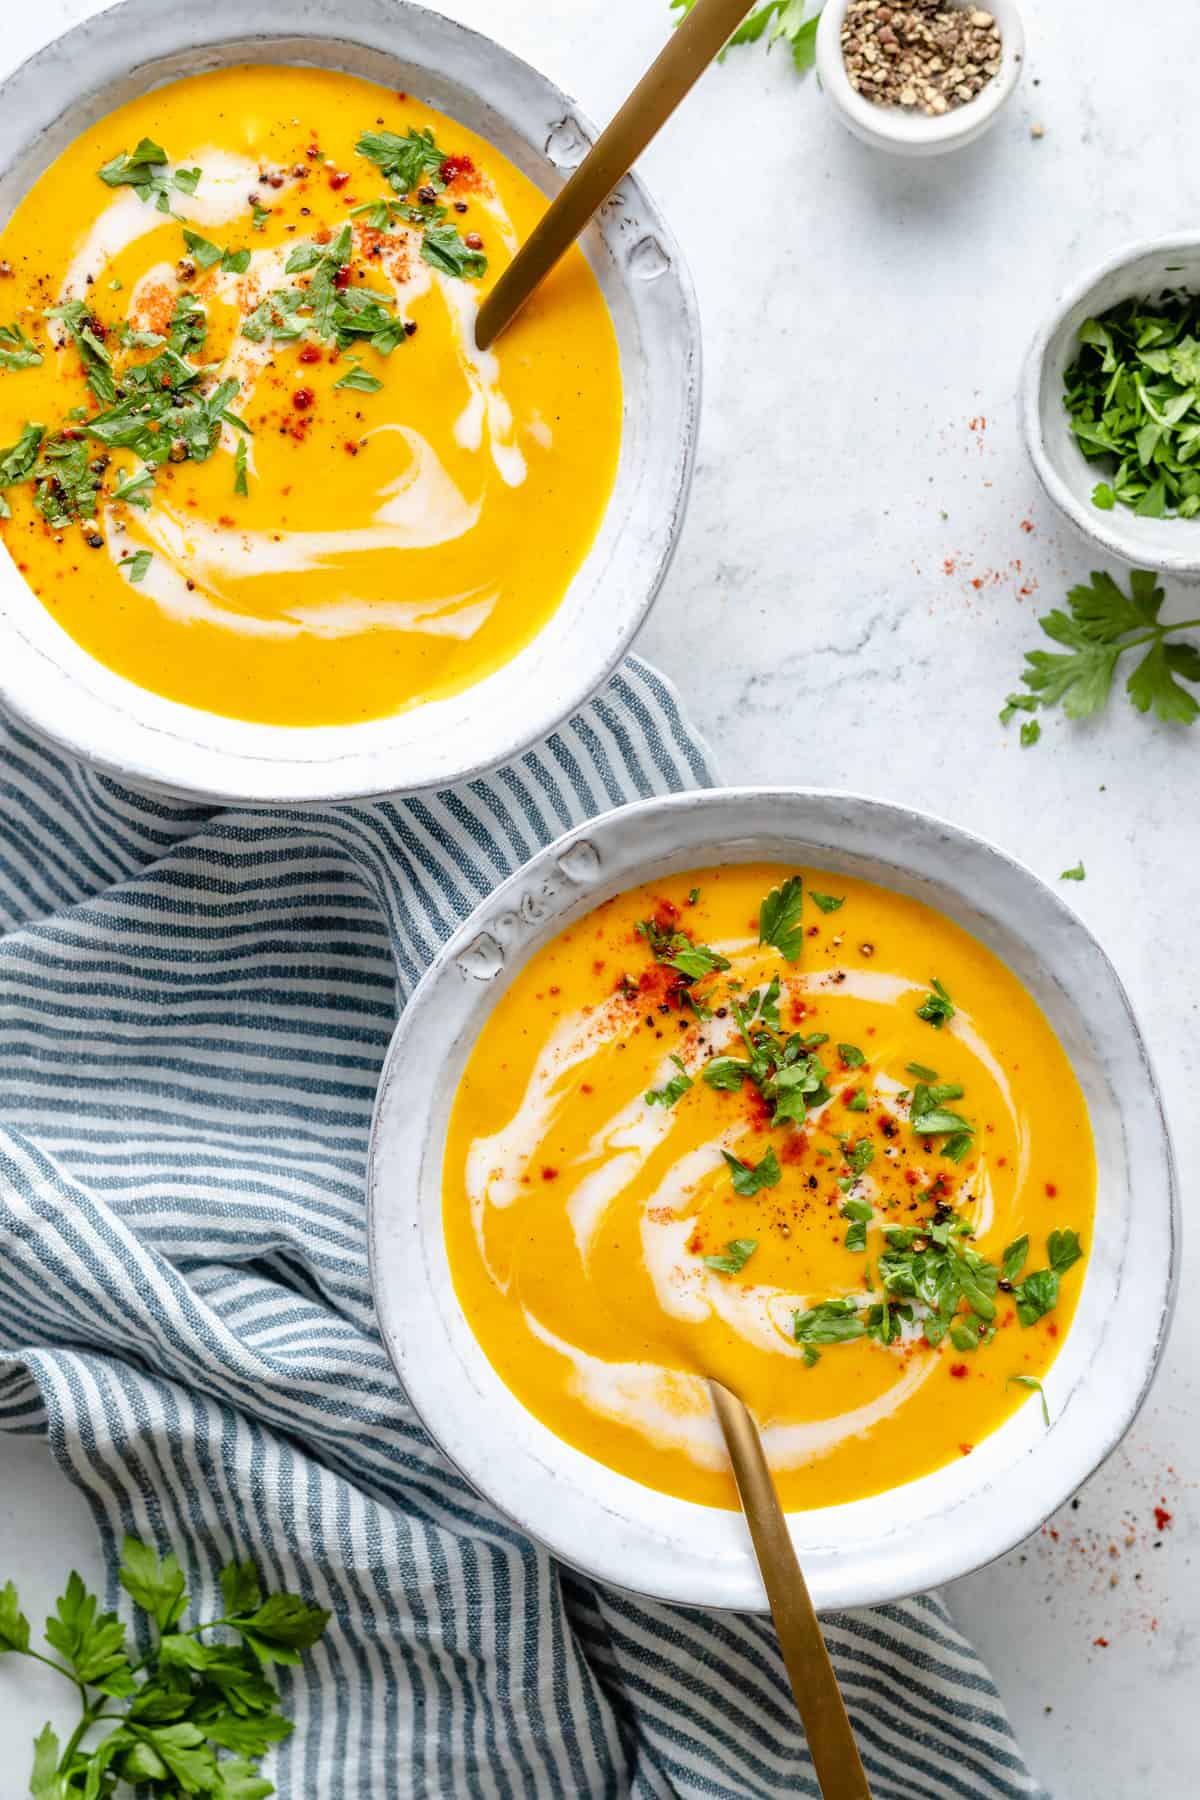 Two bowls of roasted carrot soup on blue and white striped tea towel